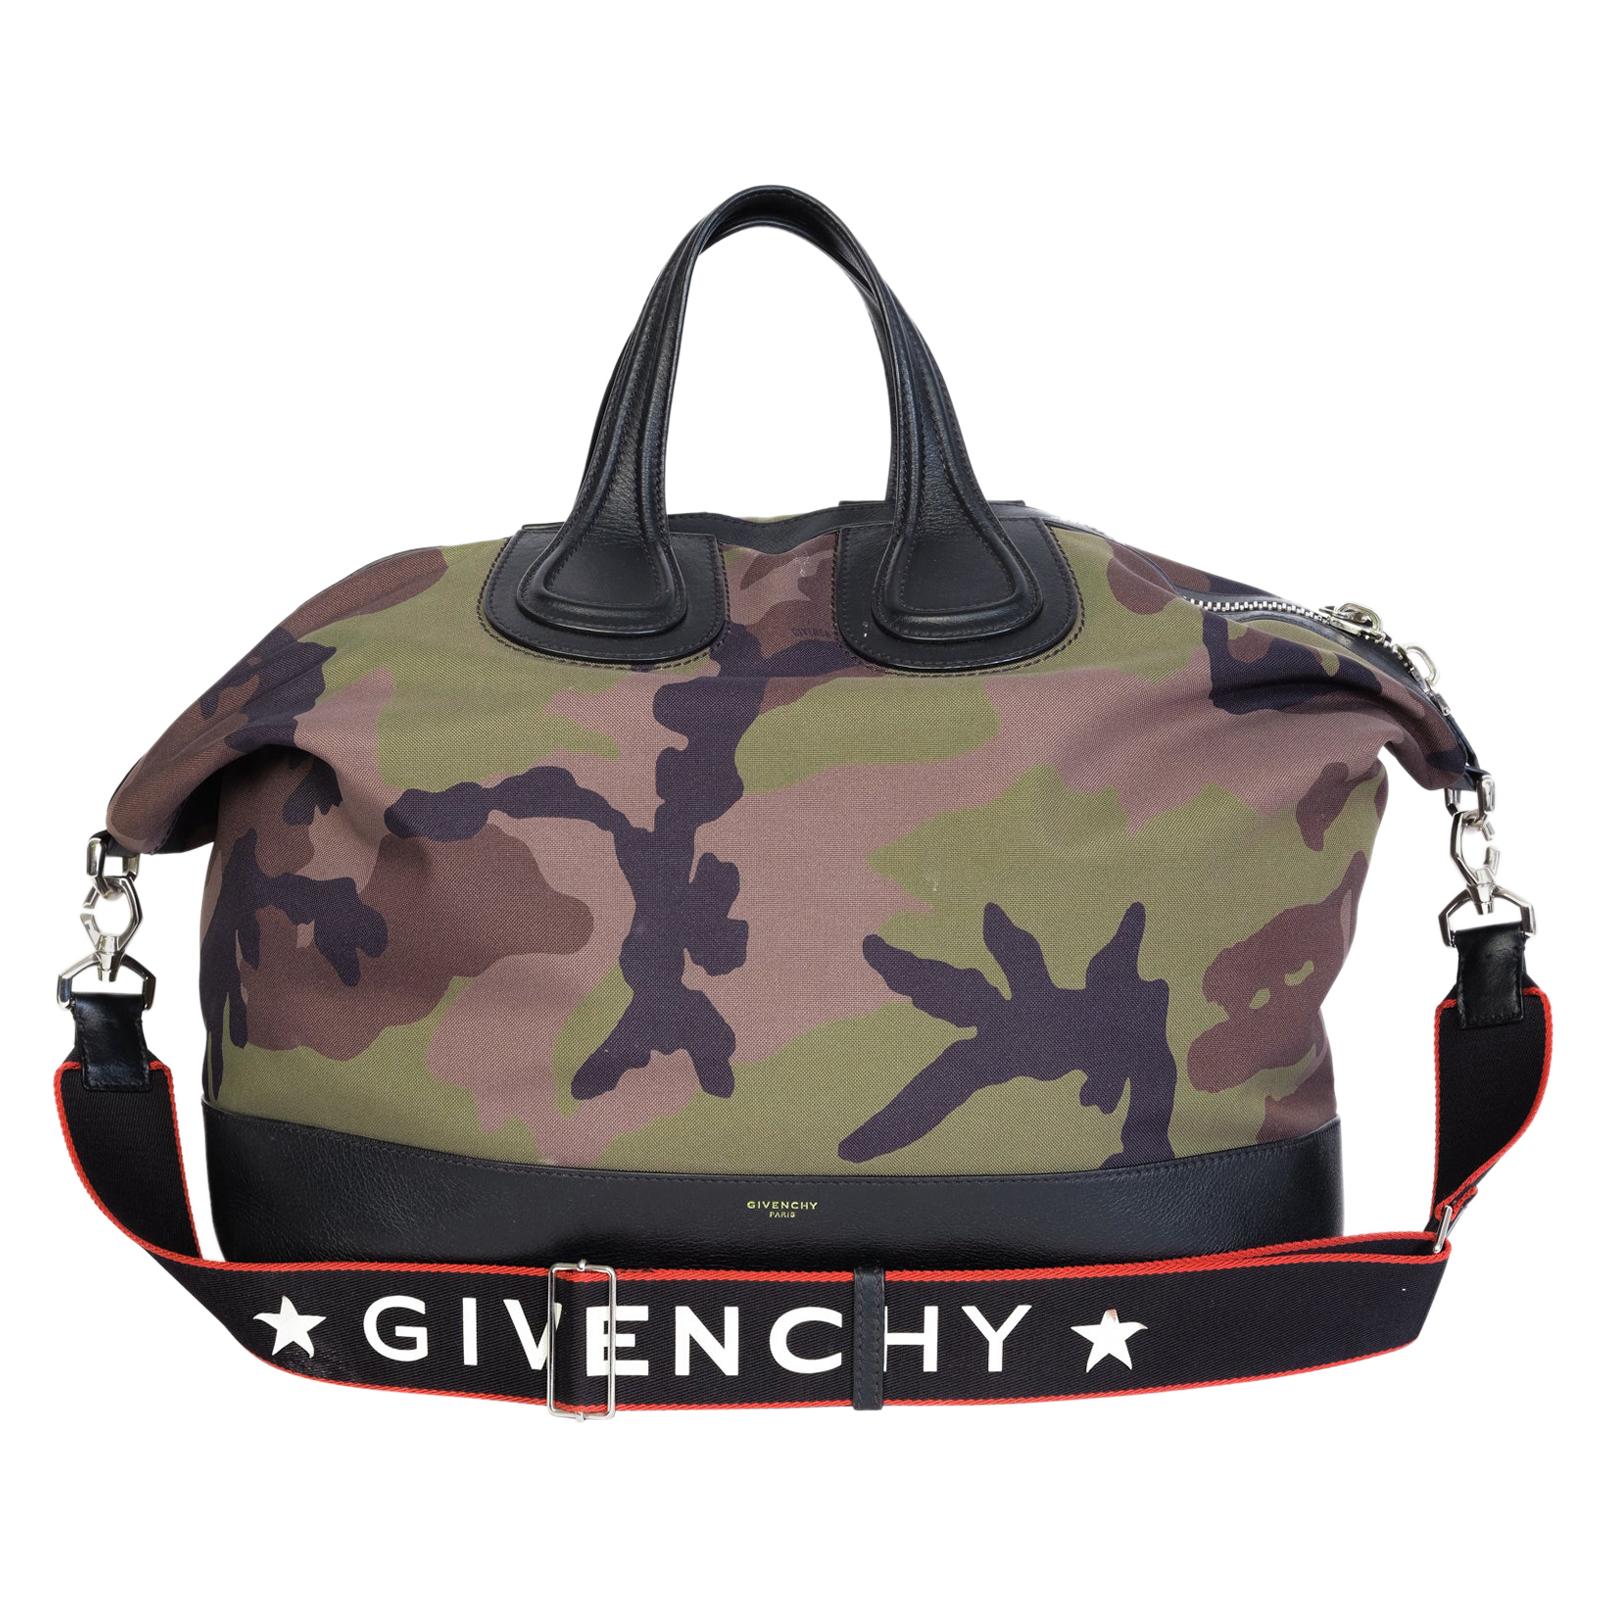 Givenchy Camo Nightengale Duffle Bag For Sale